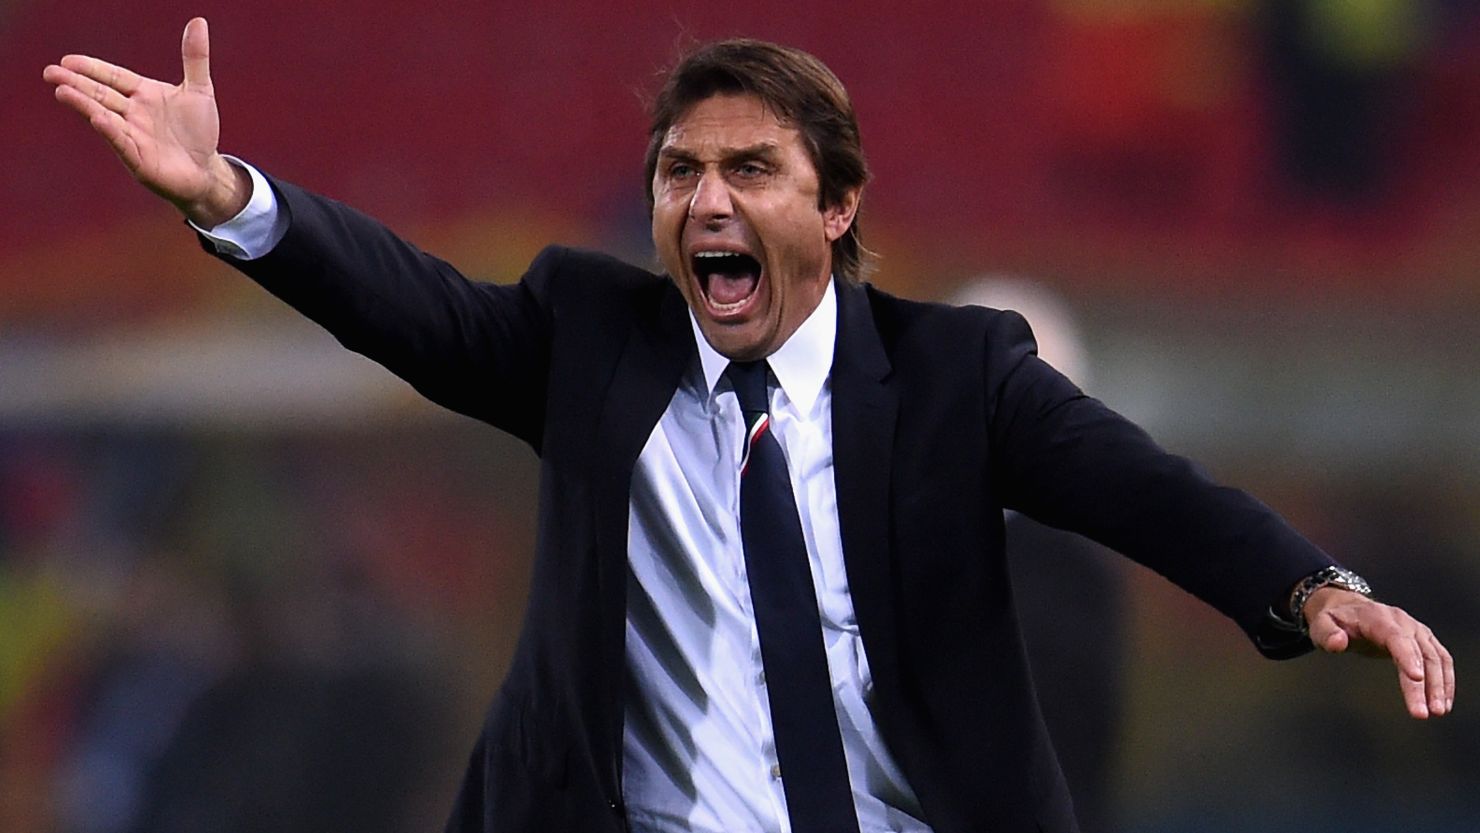  Antonio Conte's lawyer expects the Italy coach's trial to be over by mid-May.